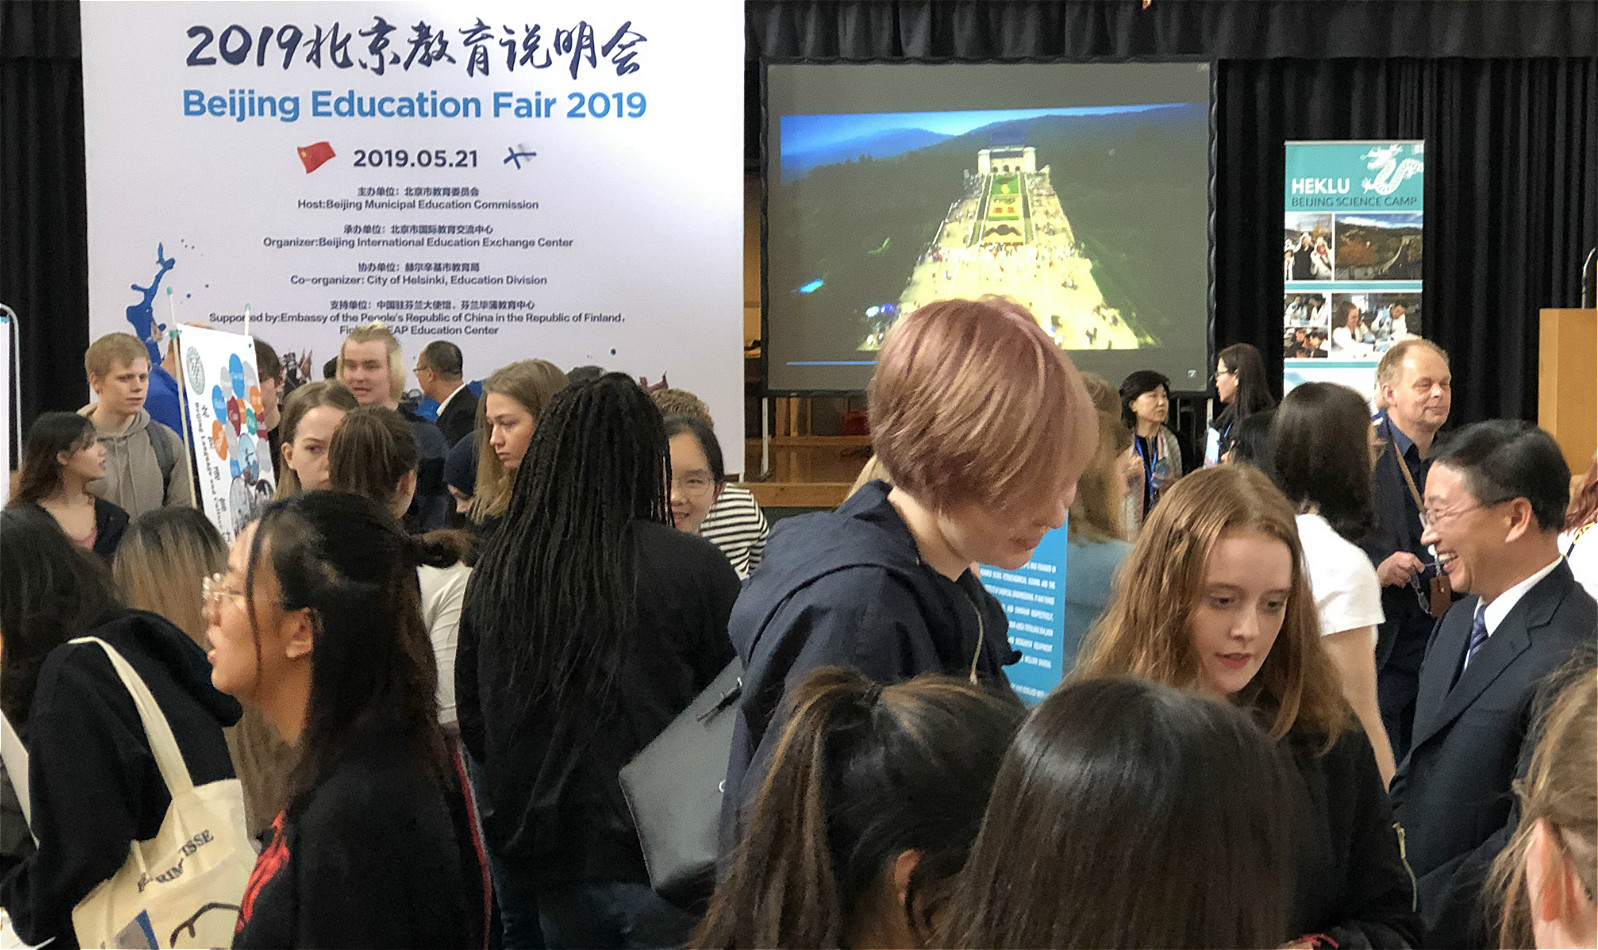 Beijing Education Briefing in Germany, Sweden and Finland